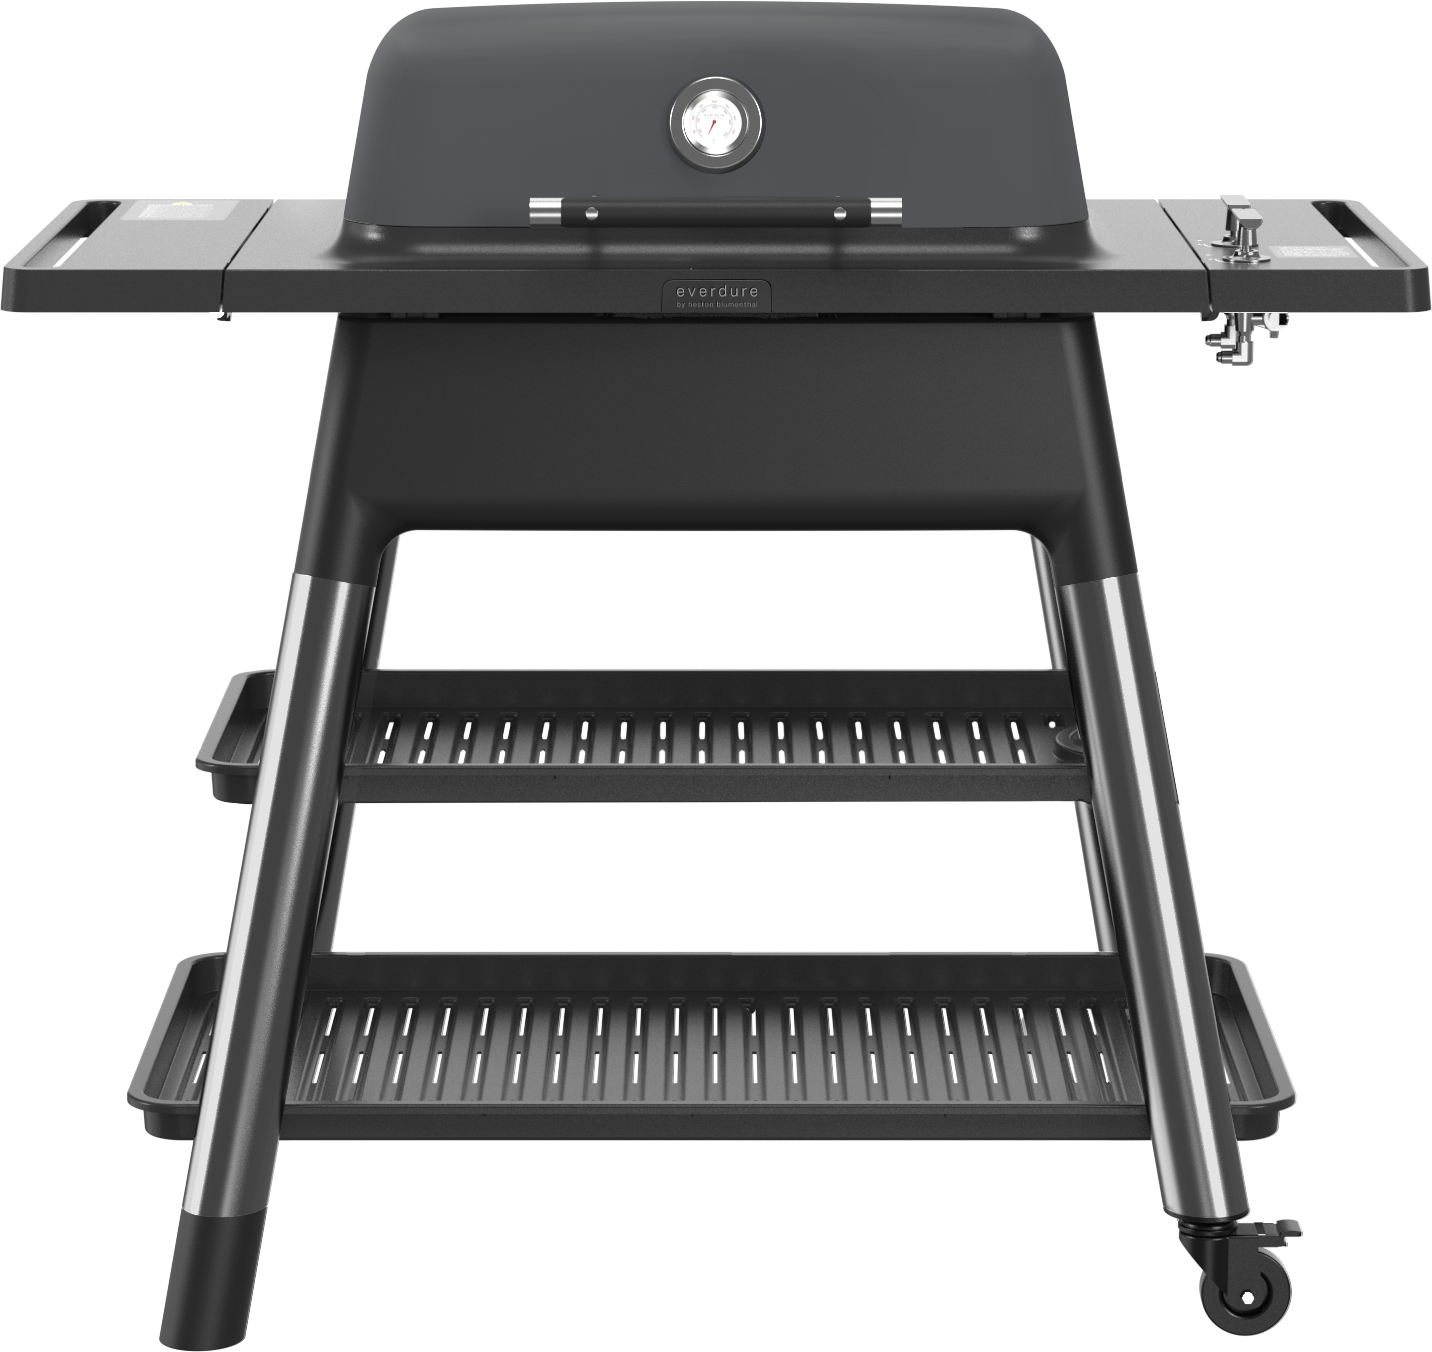 Everdure FORCE Gasgrill graphite - Neues Modell